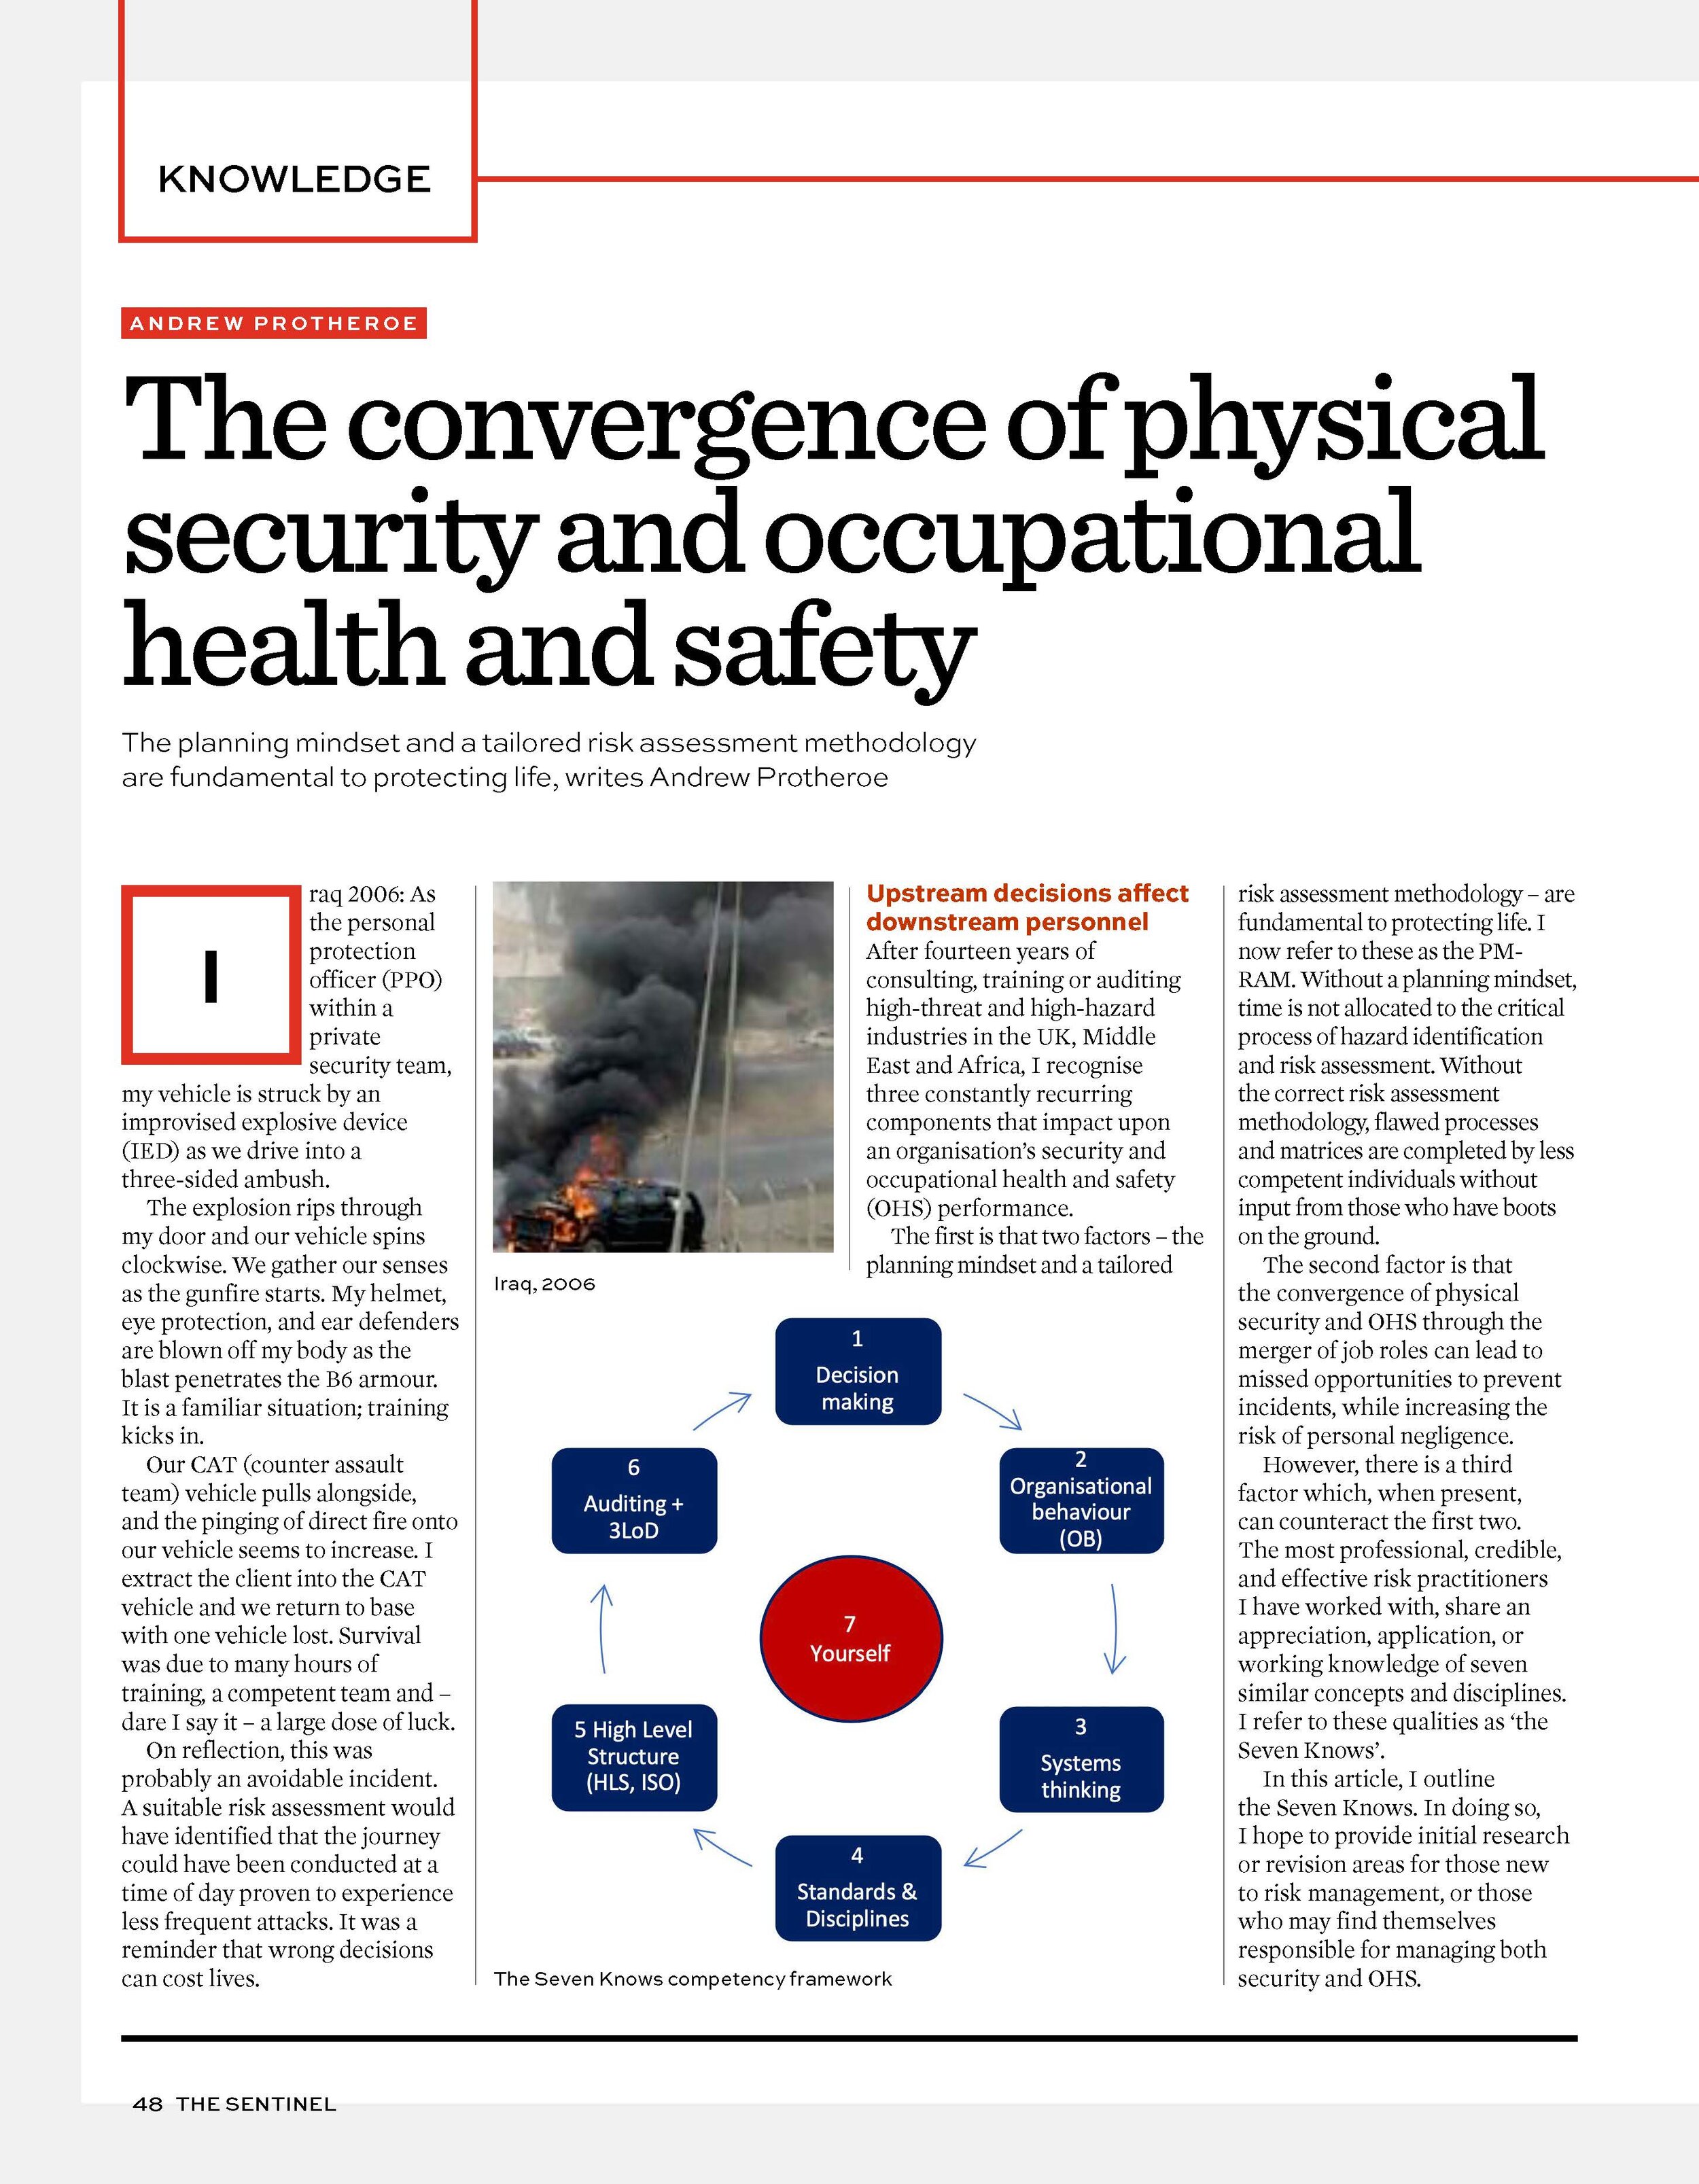 Sentinel - The convergence of physical security and occupational health and safety_Page_2.jpg